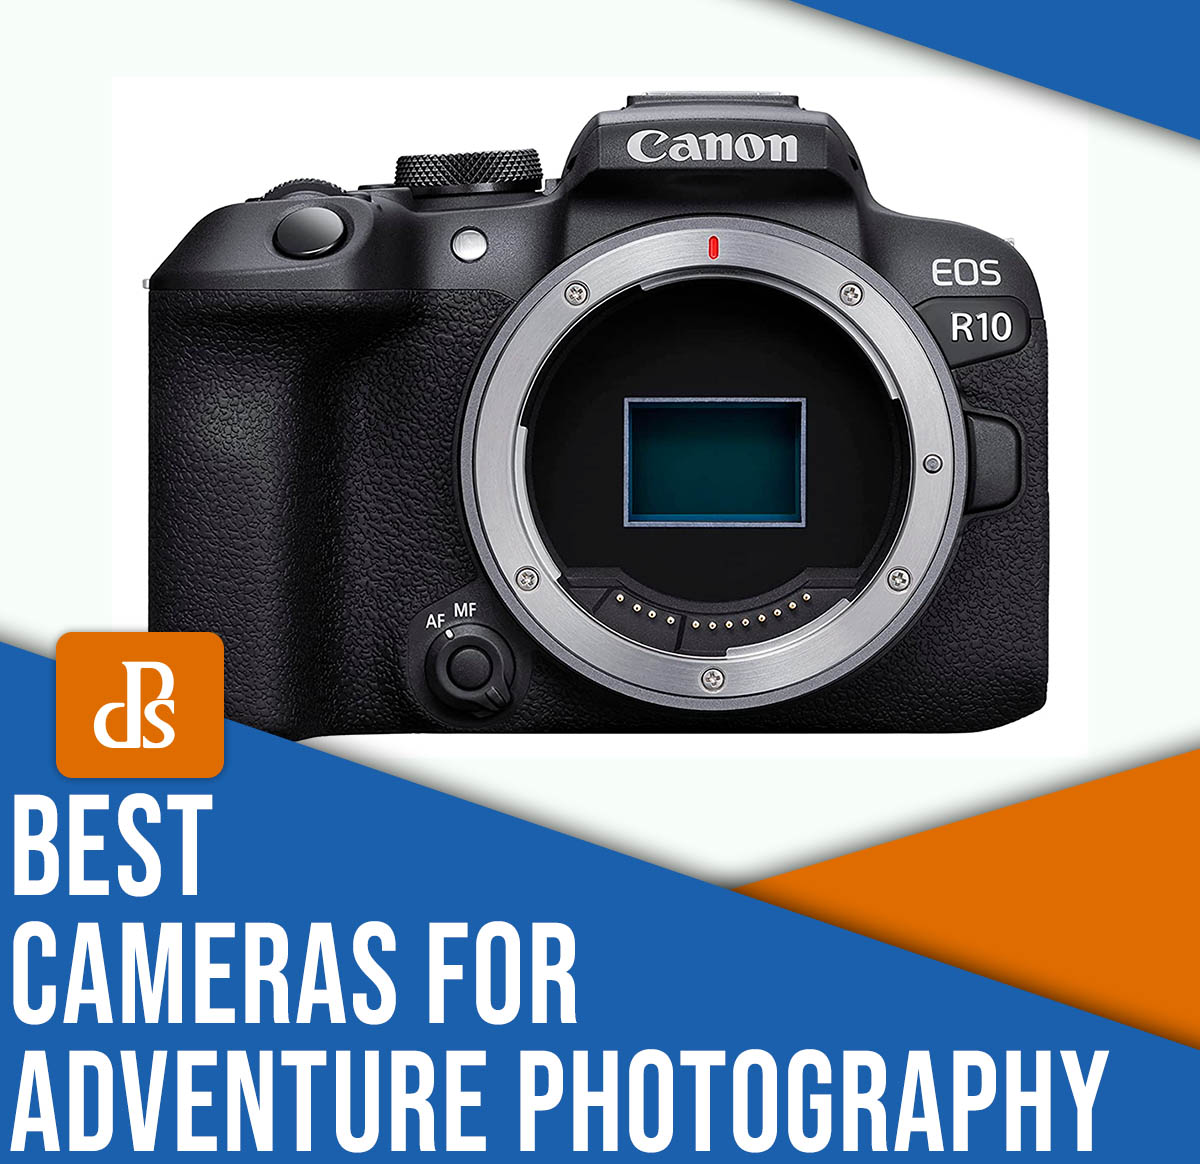 Best cameras for adventure photography